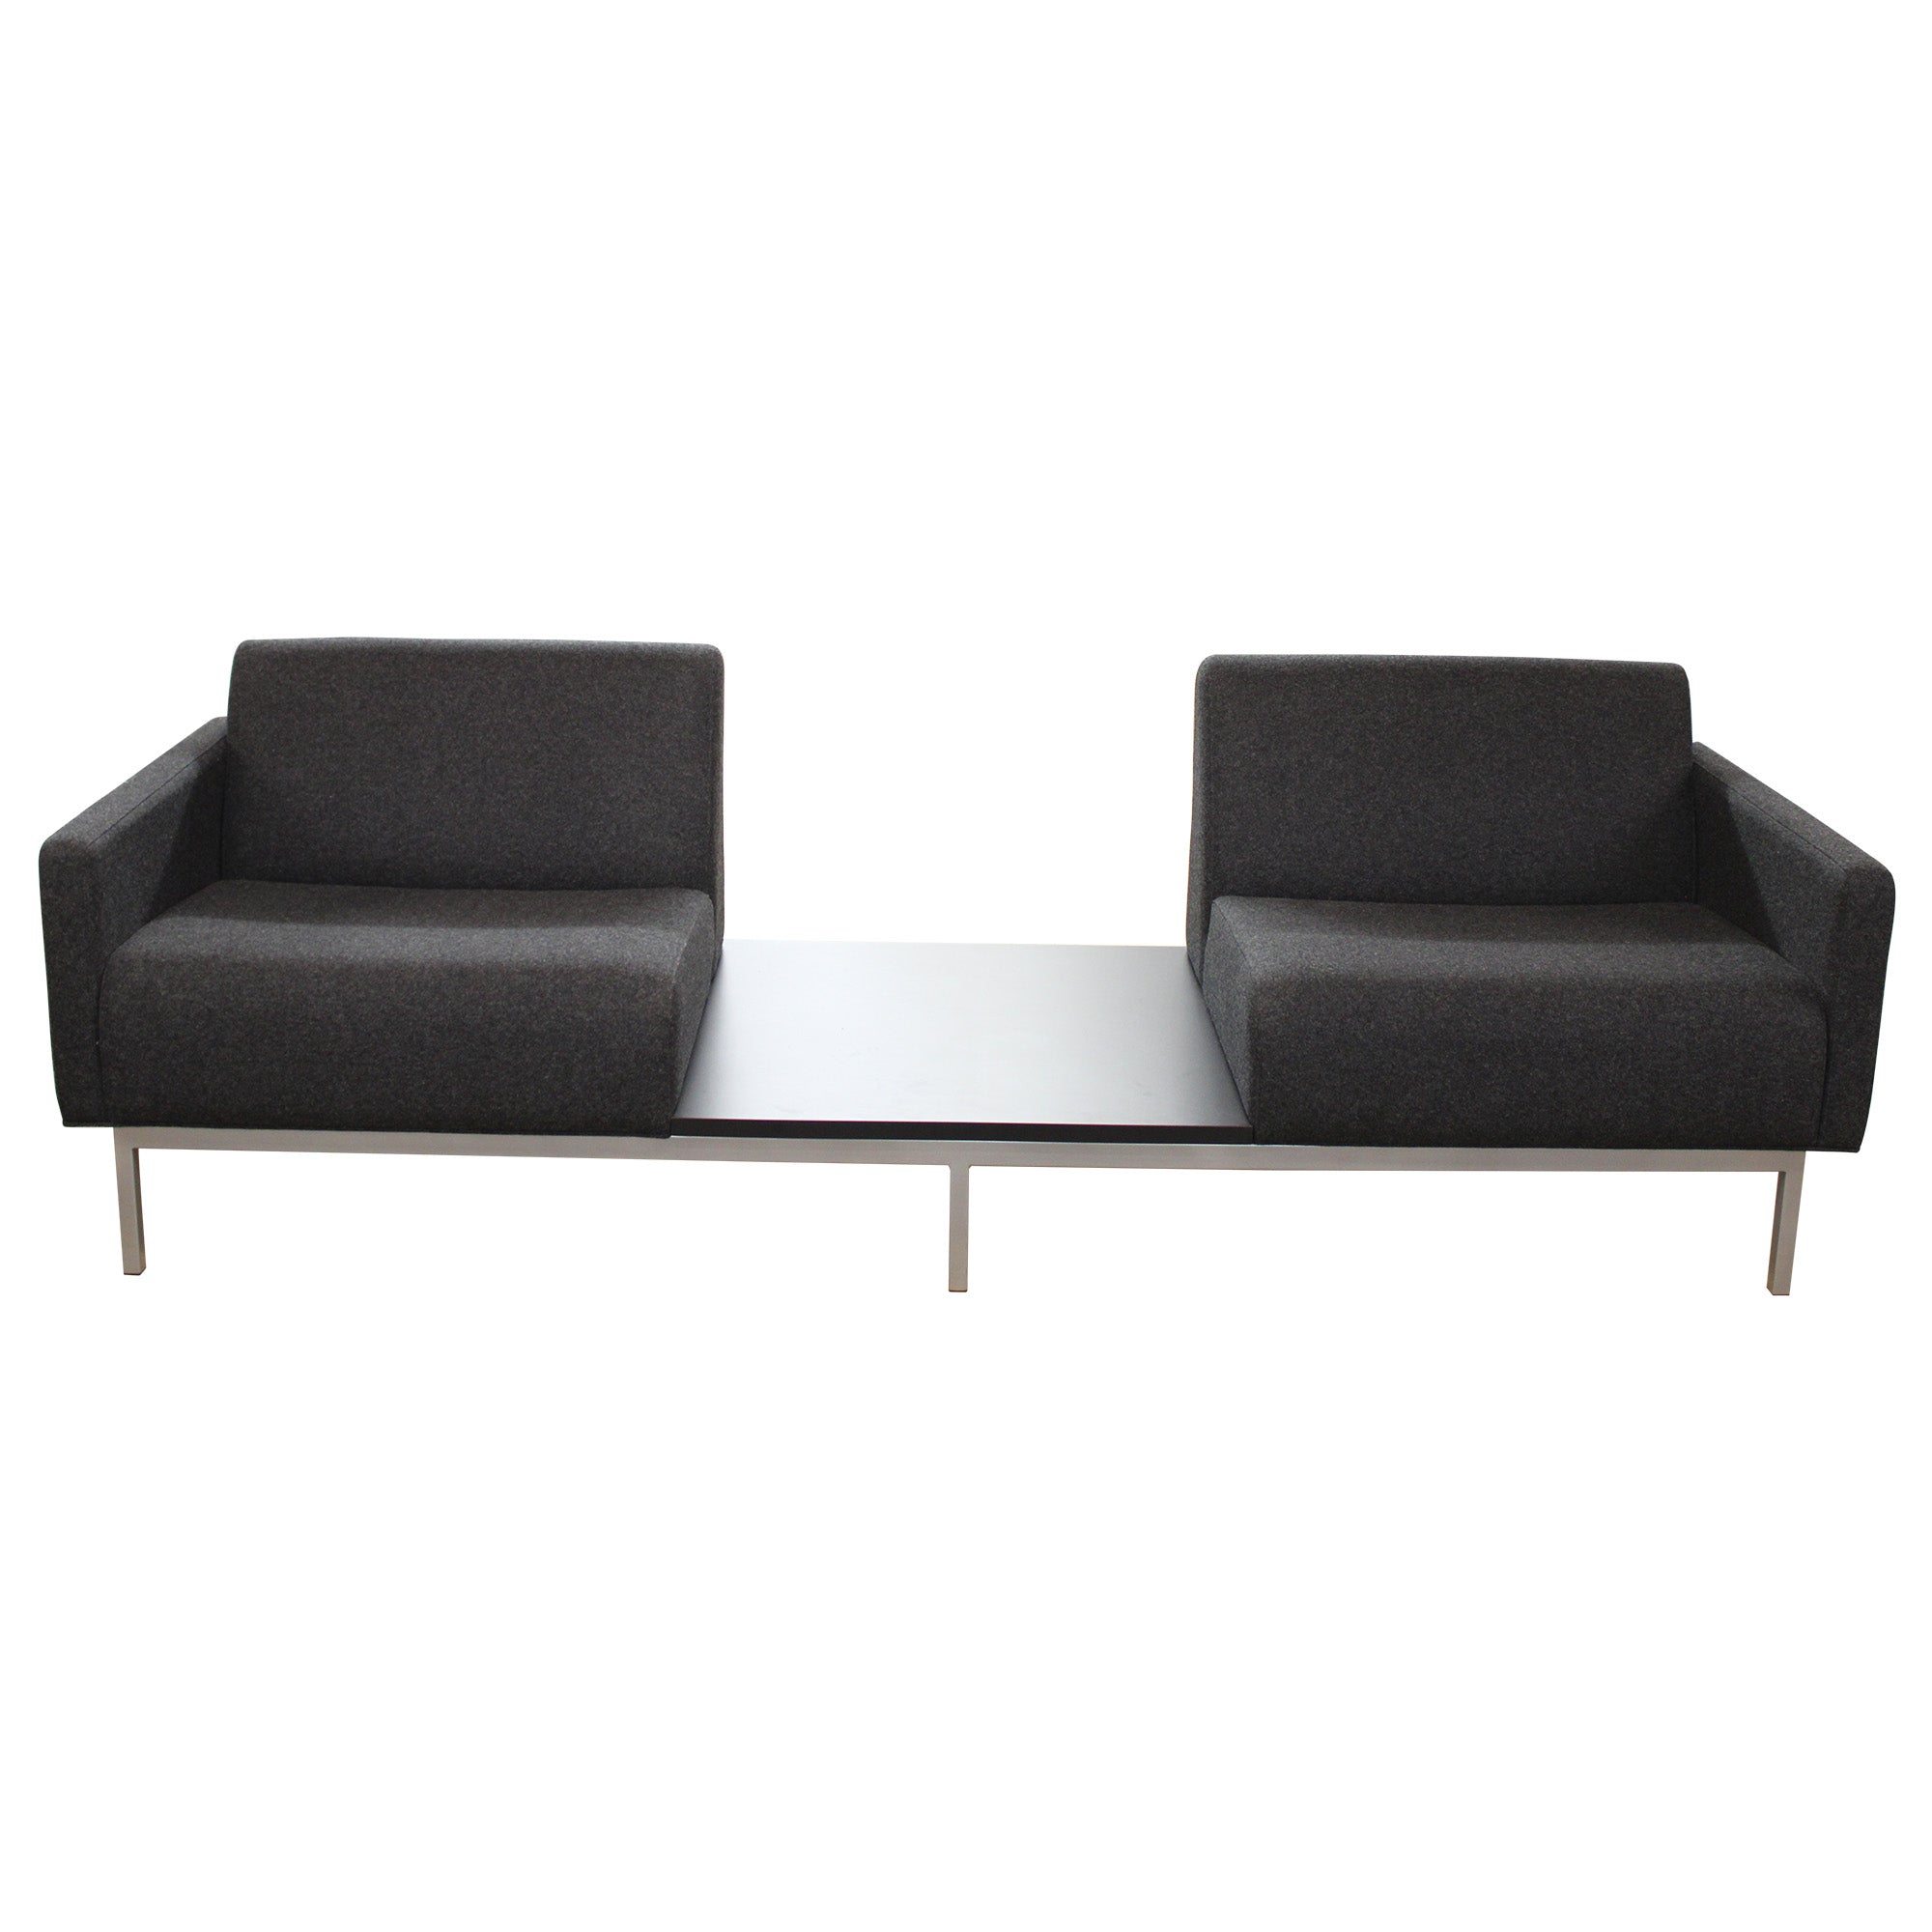 Todd 2 Seat Sofa by Cartwright - Preowned